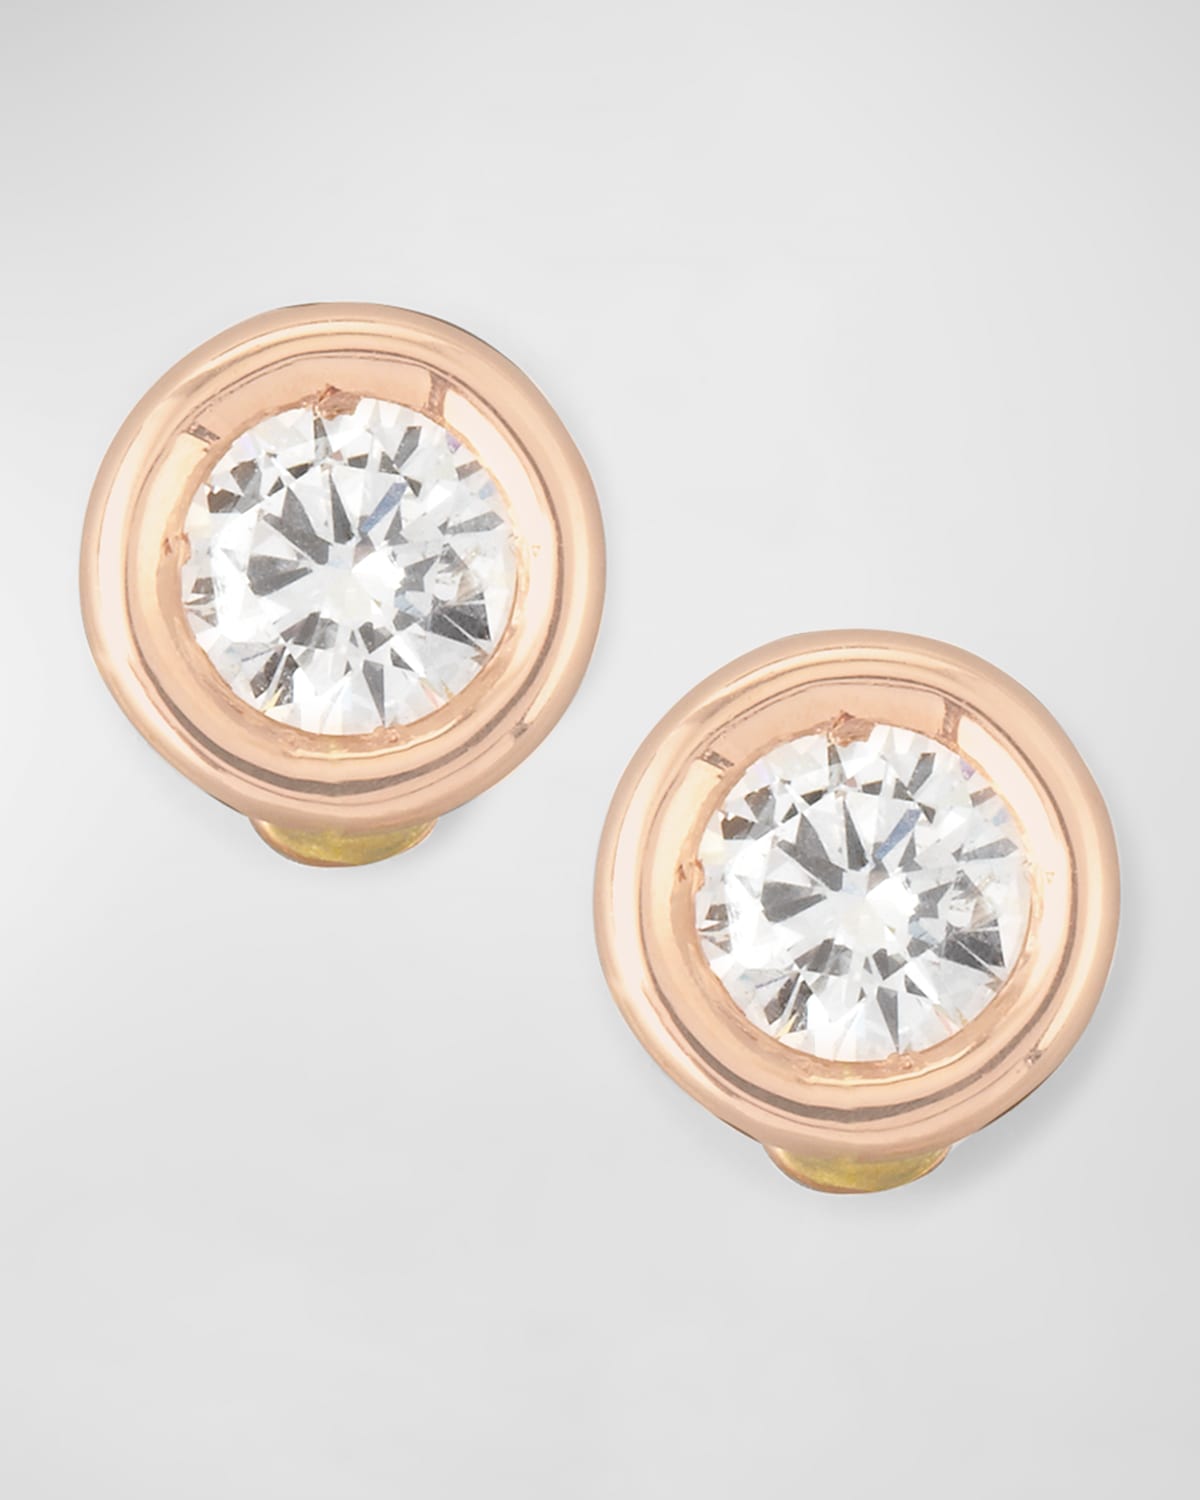 Roberto Coin 18k Gold Diamond Solitaire Stud Earrings In Rose Gold